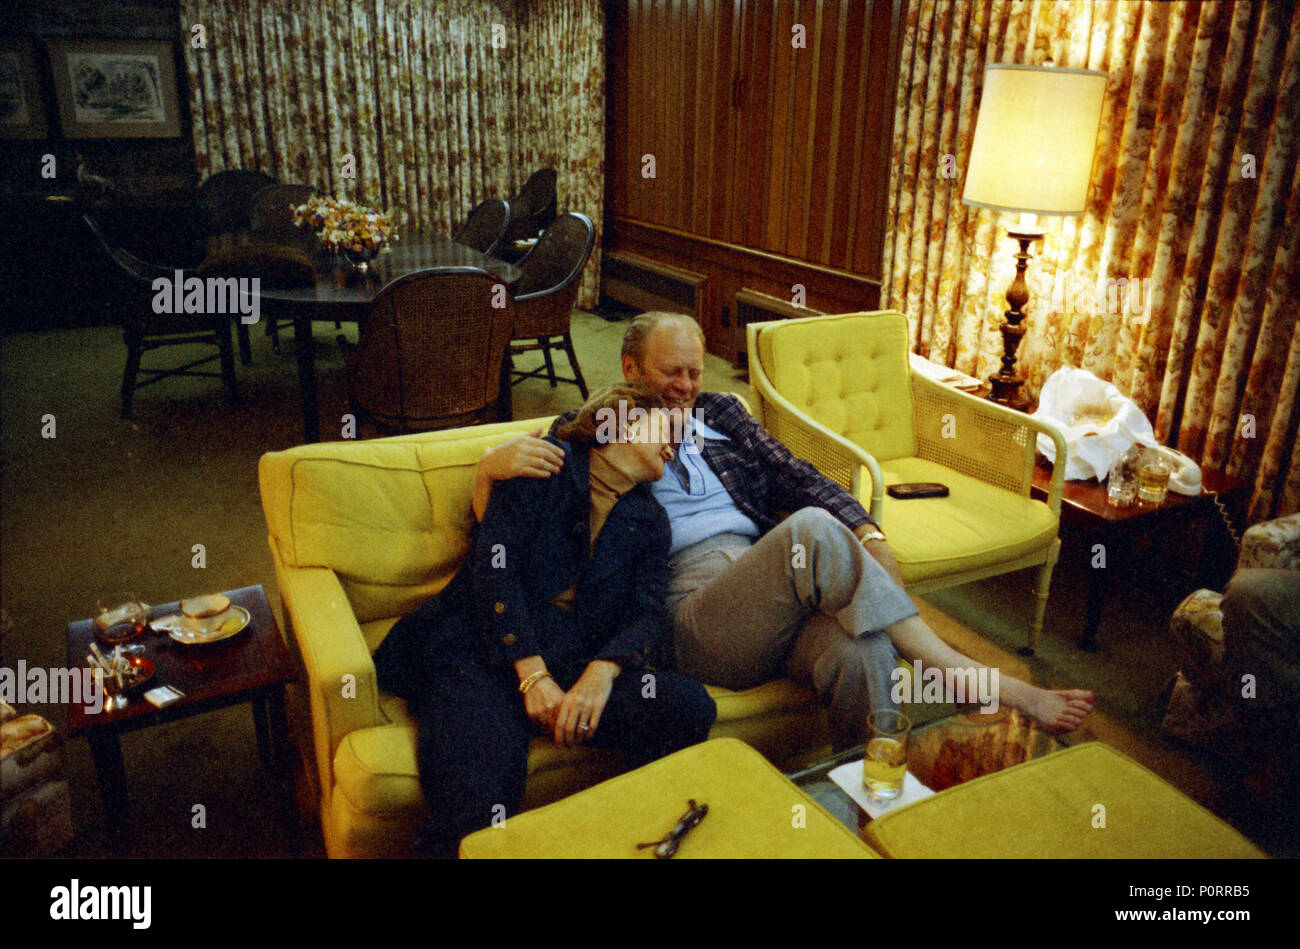 1974, September 2 – Camp David - Aspen Lodge - Living Room – Thurmont, MD – Gerald R. Ford, Betty Ford – seated on couch, snuggling - GRF and BF in robes – Labor Day Weekend Trip to Camp David, Maryland - Thurmont, Maryland Stock Photo